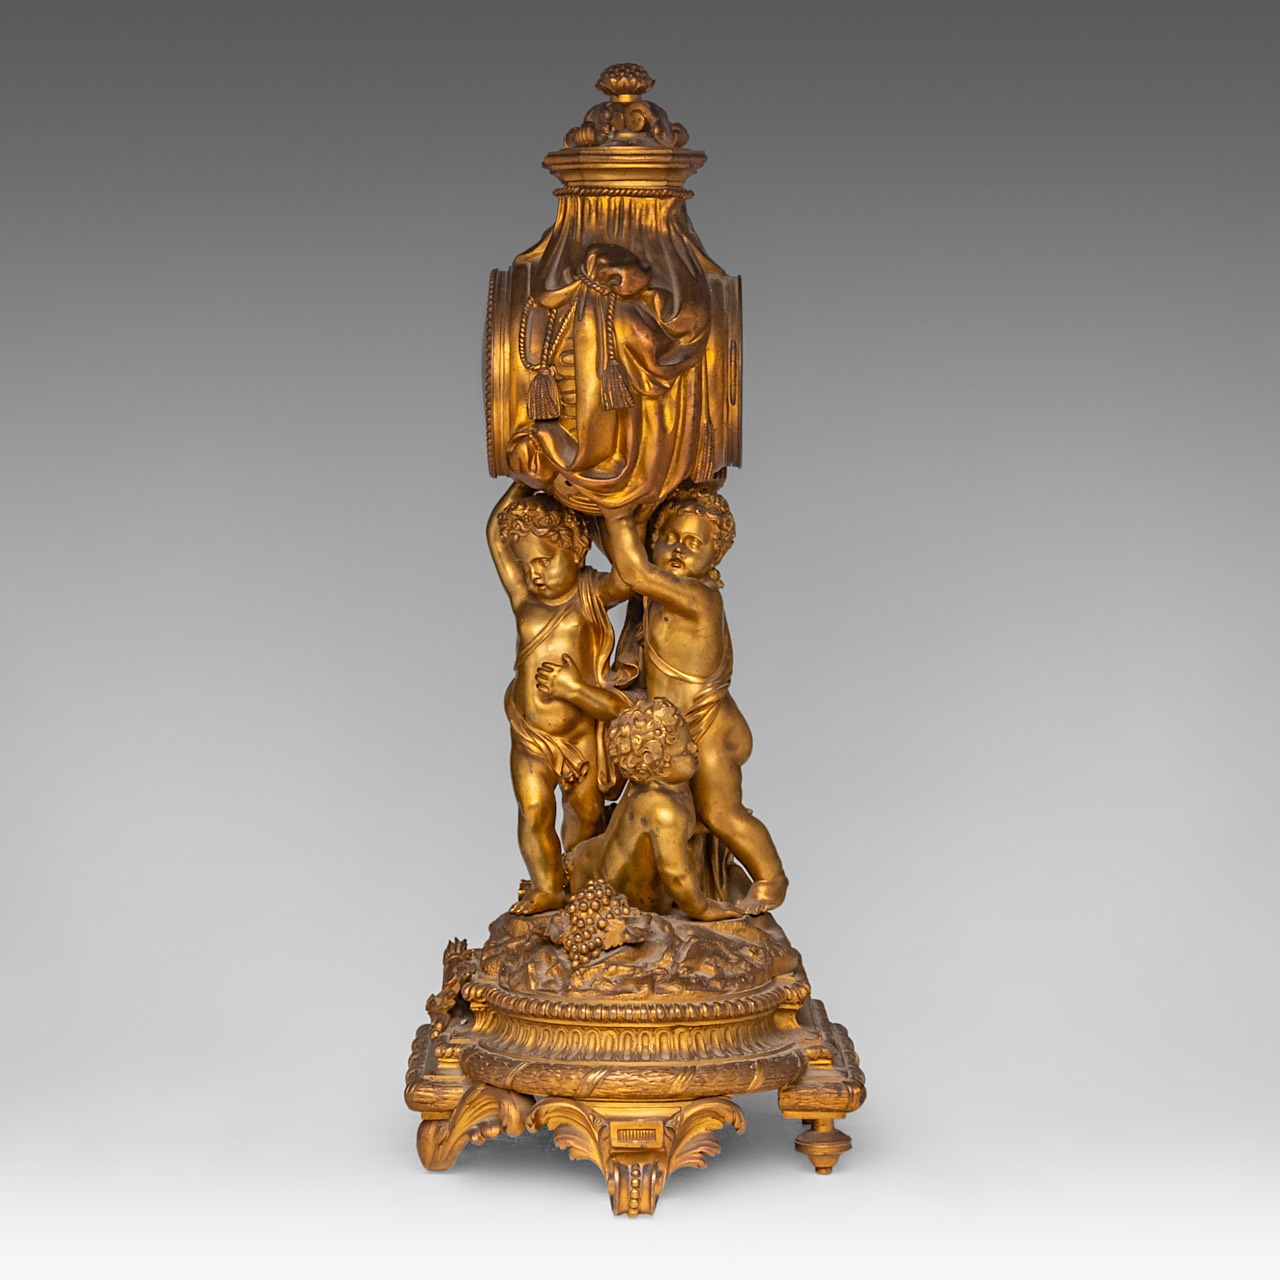 A Neoclassical gilt bronze mantle clock with putti holding the clock case, Lerolle, Paris, H 61 cm - Image 3 of 7